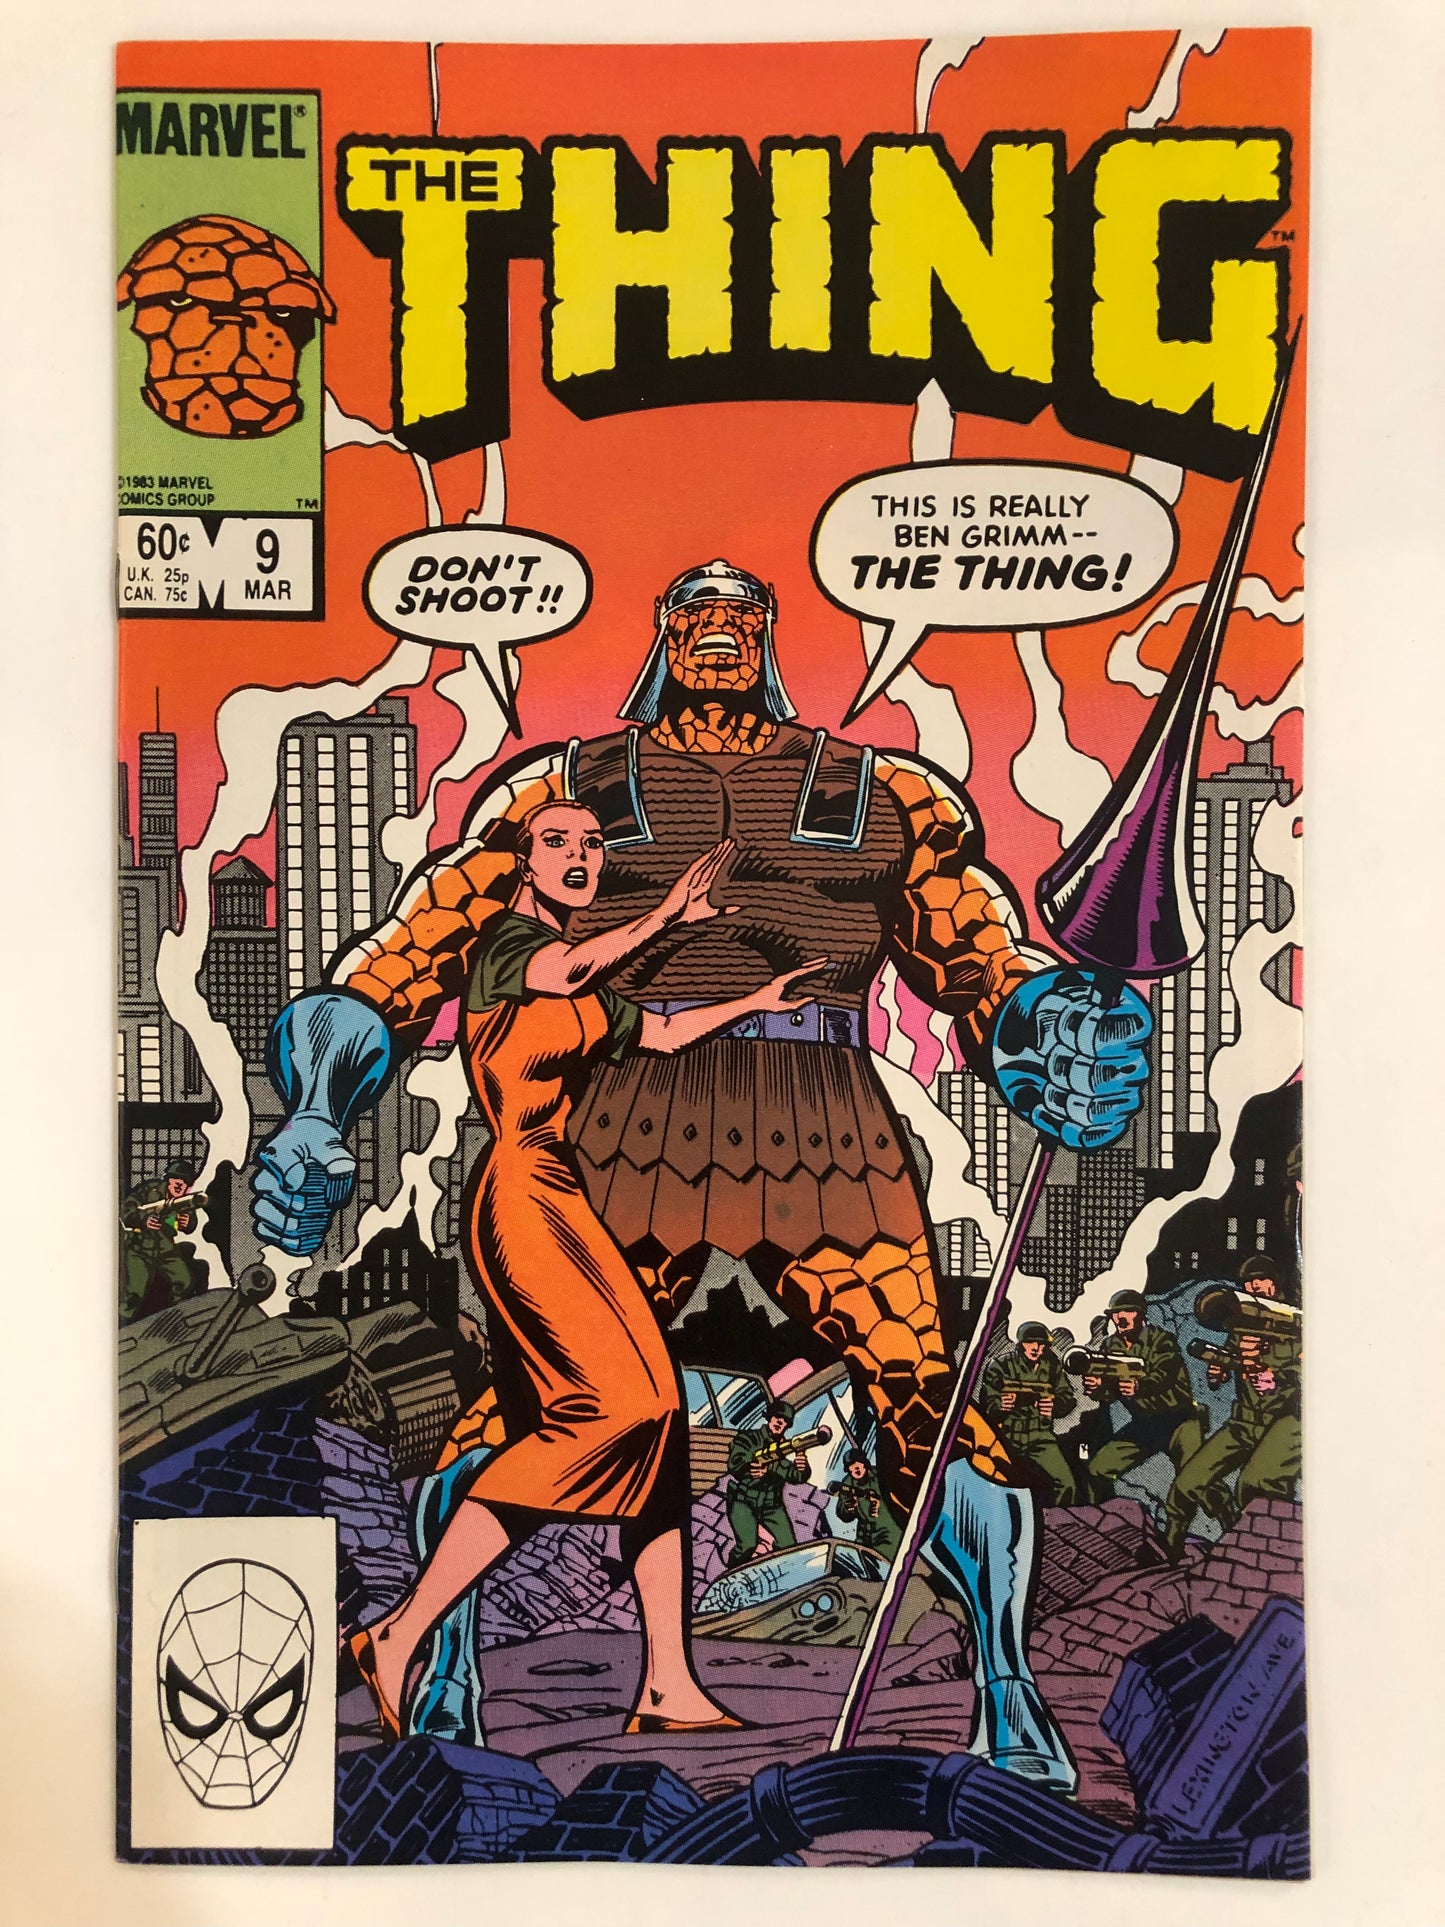 The Thing #1-12